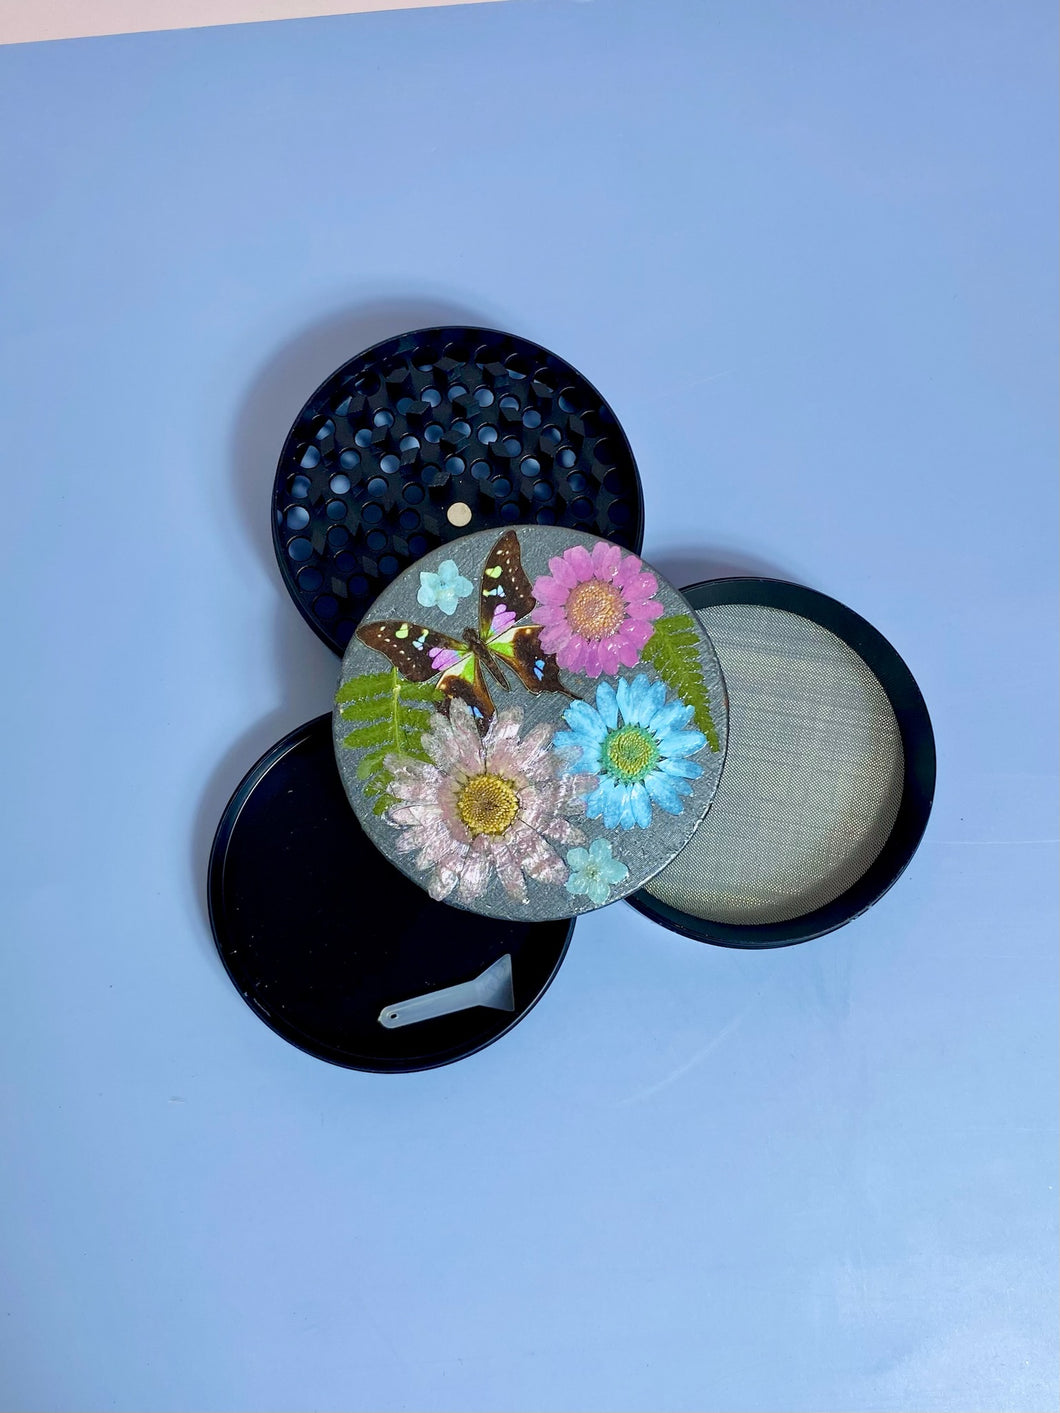 grinder covered in real flowers with butterfly